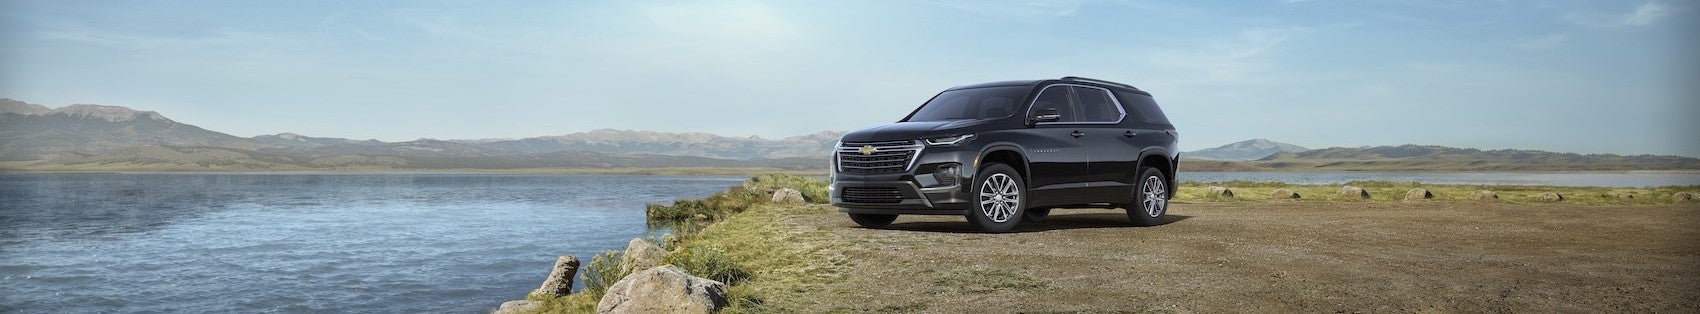 Chevy Traverse Towing